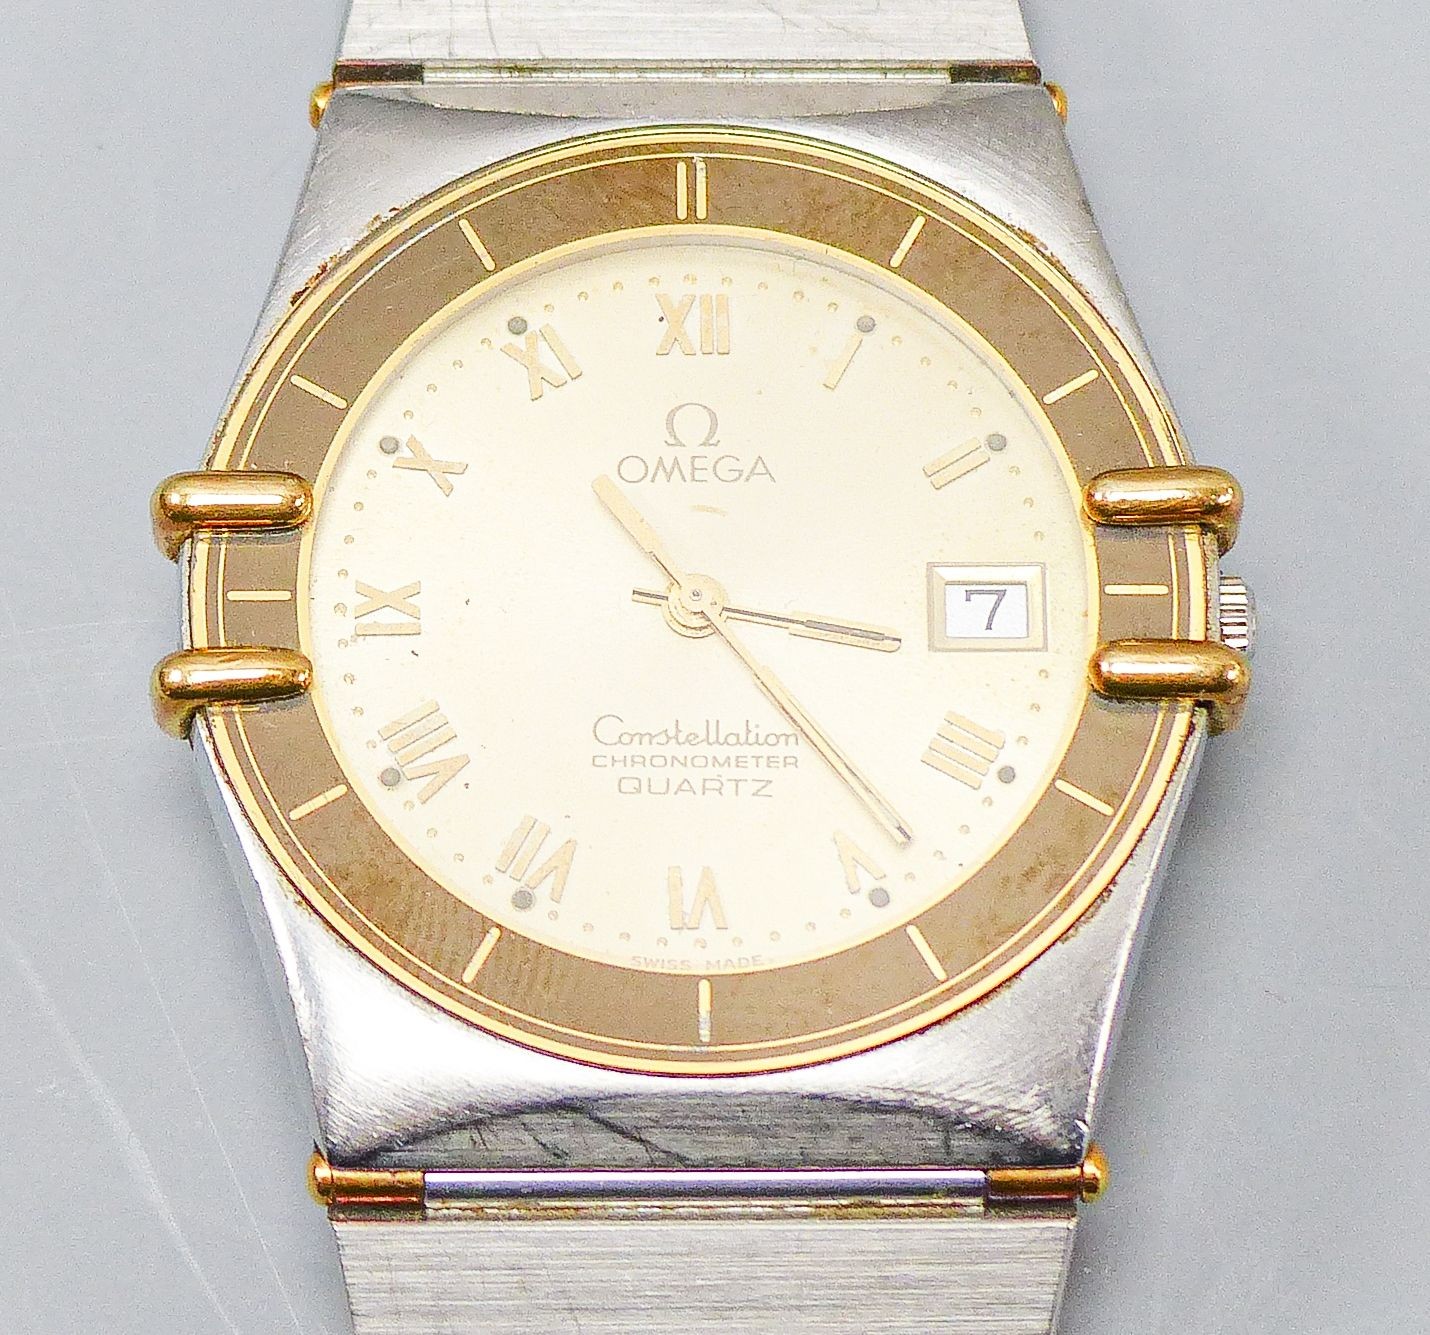 A gentleman's stainless steel Omega Constellation quartz wrist watch, case diameter 34mm, no box or papers.